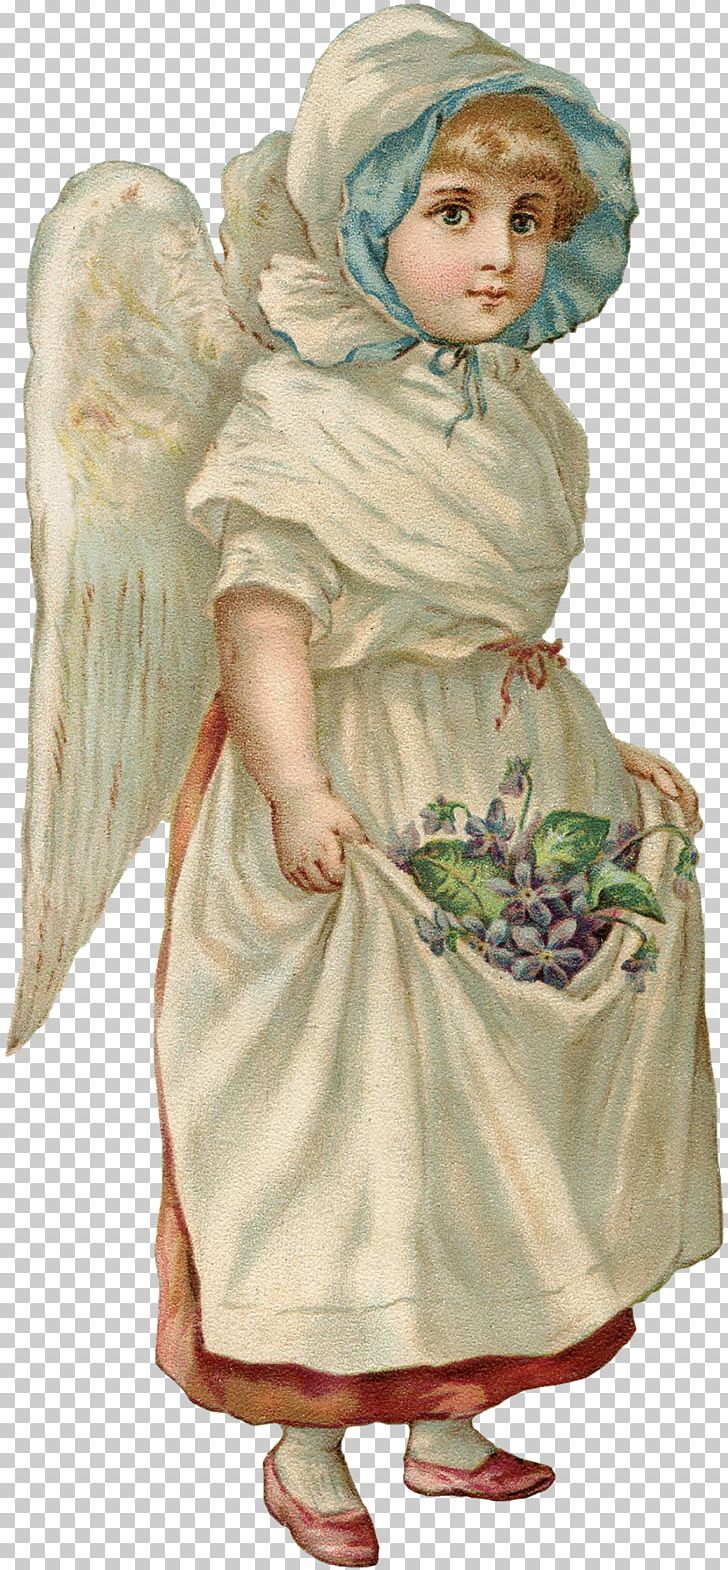 Toddler Costume Angel M PNG, Clipart, Angel, Angel M, Cherub, Child, Costume Free PNG Download